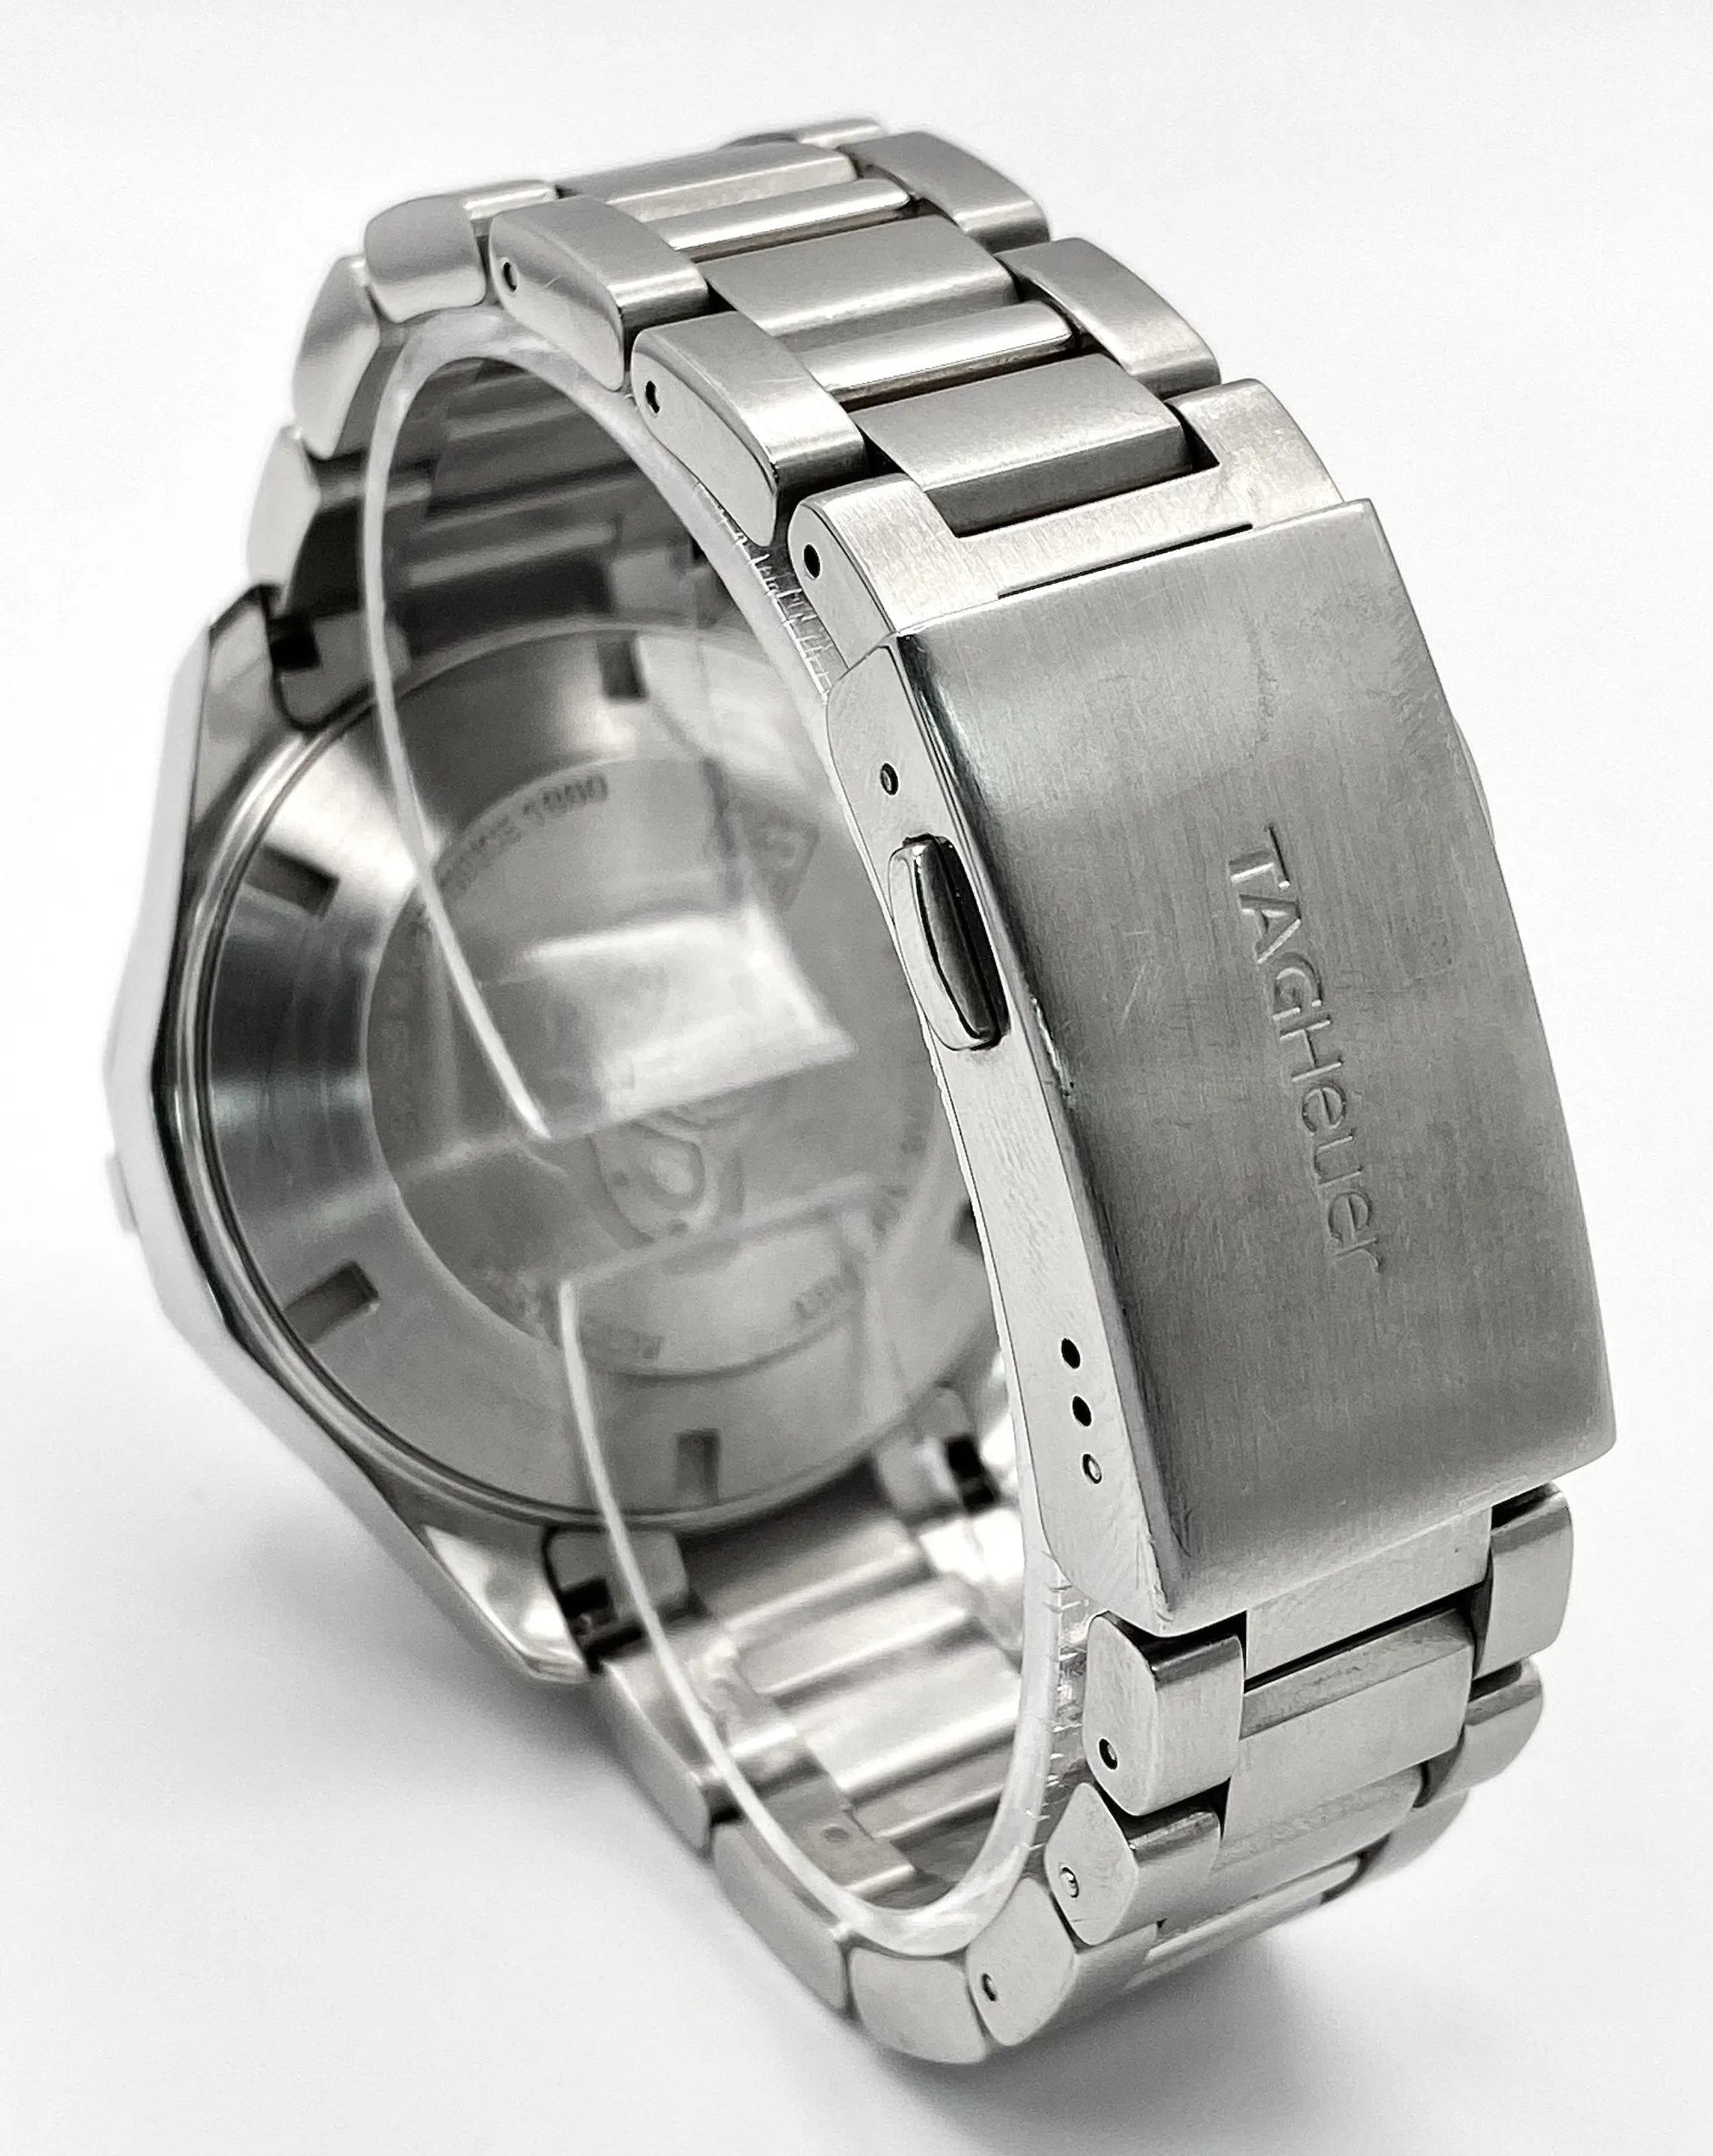 TAG Heuer Aquaracer CAY2110 44mm Stainless steel 5